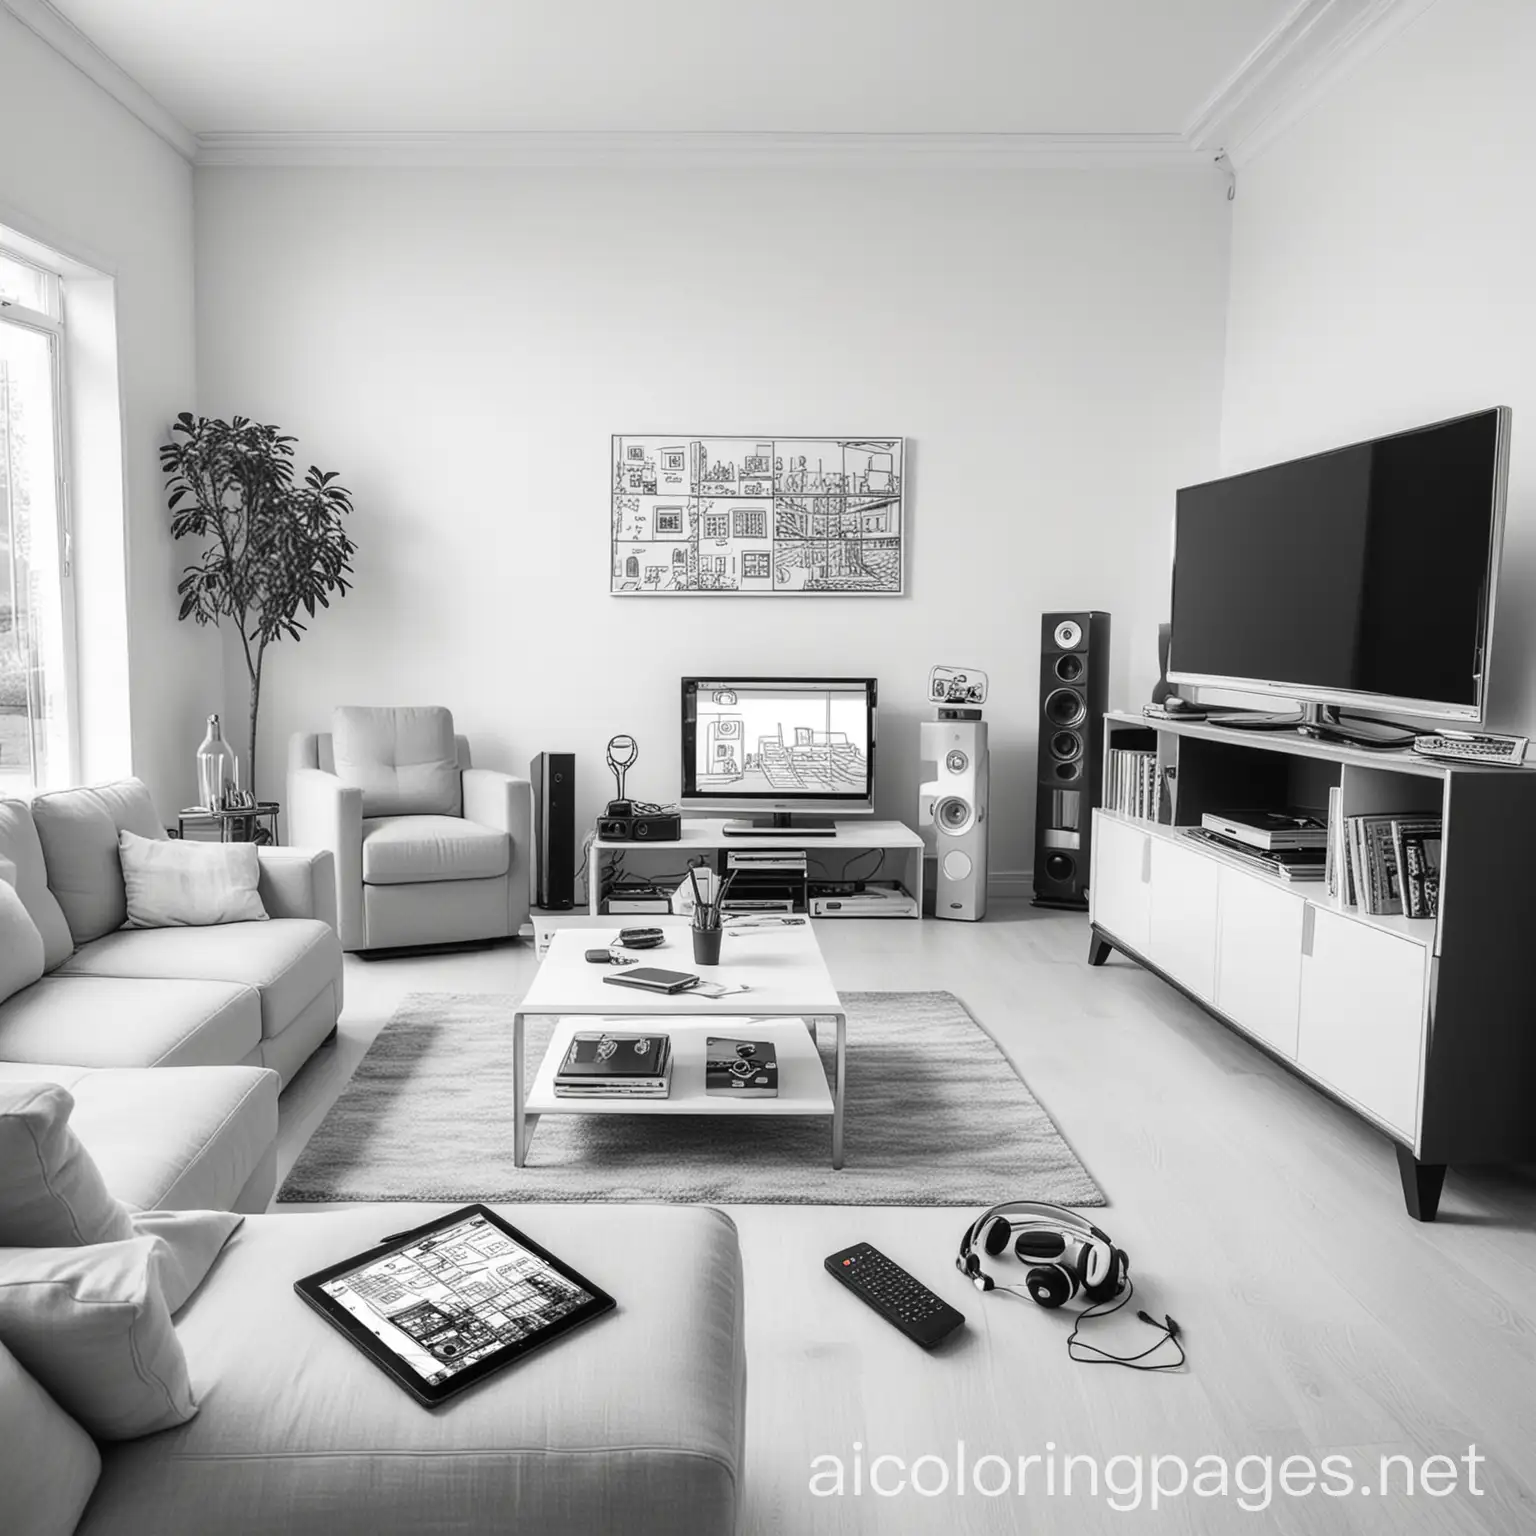 Family-Living-Room-Gadgets-TV-Headphones-Tablet-and-More